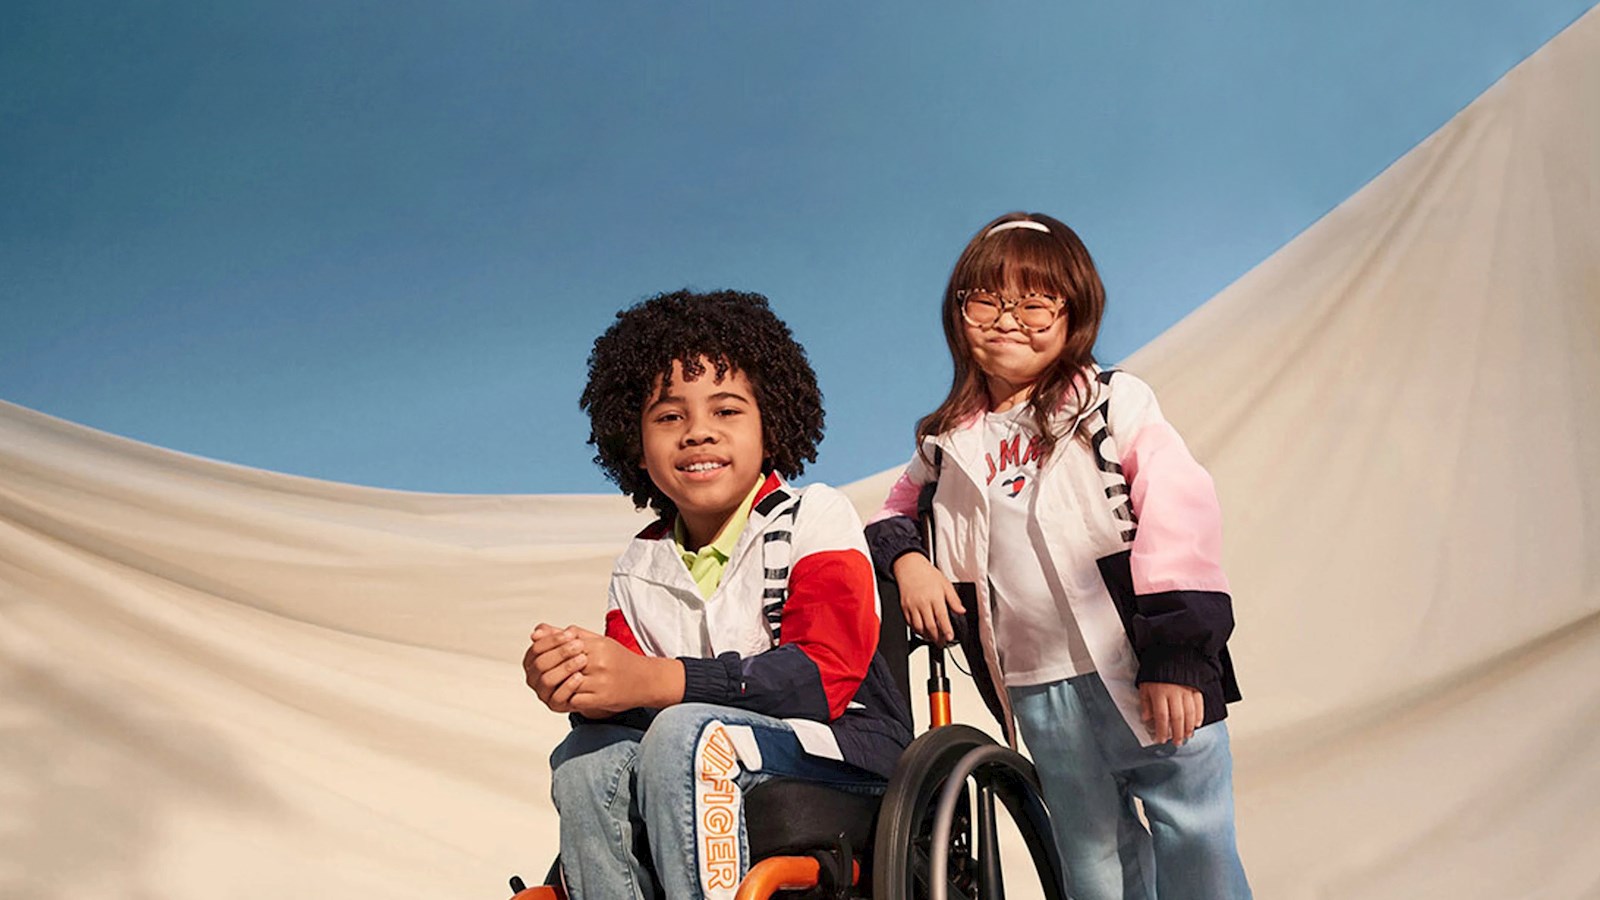 Girl and boy in a wheelchair on blue and white background